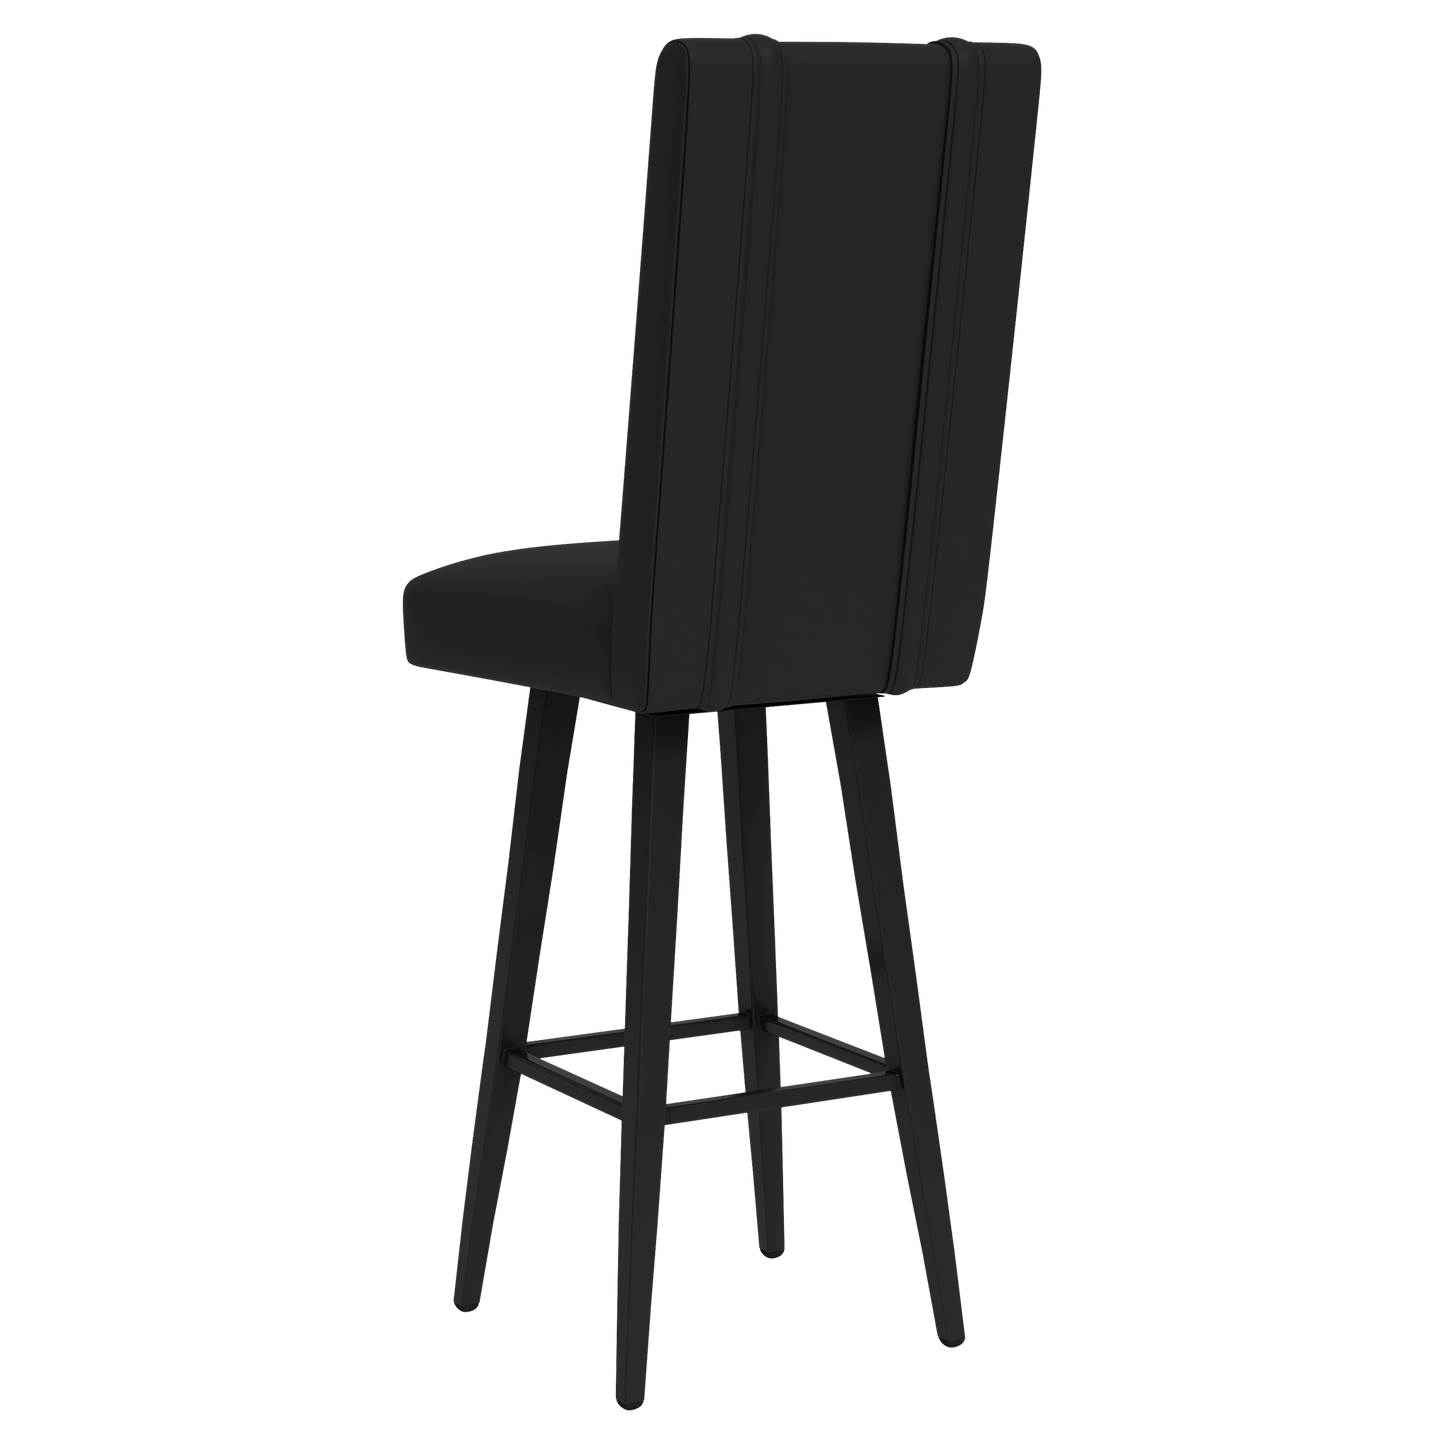 Swivel Bar Stool 2000 with Florida Marlins Cooperstown Secondary